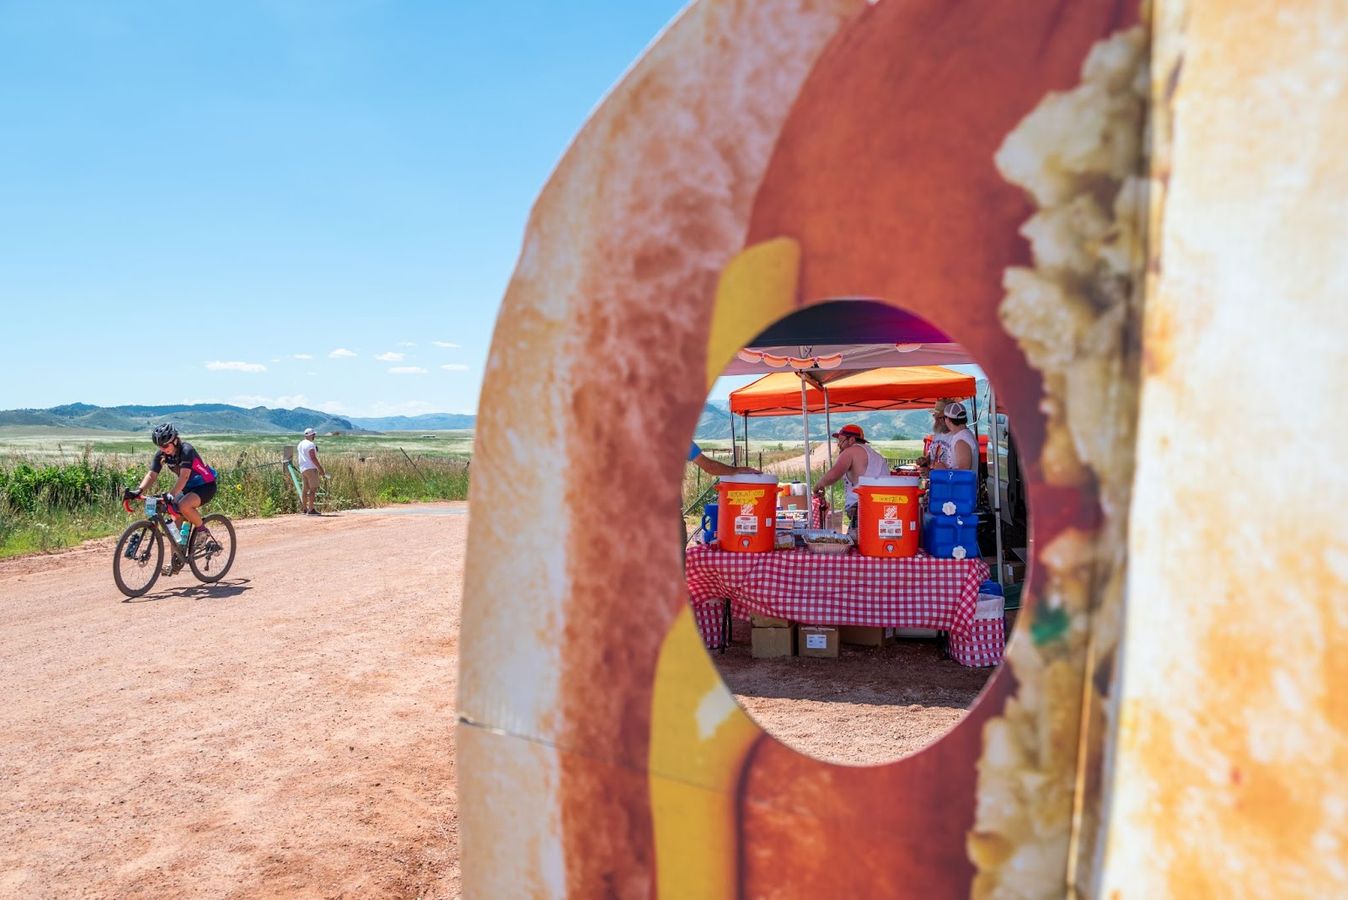 The hot dog themed aid station before the route enters into the mountains